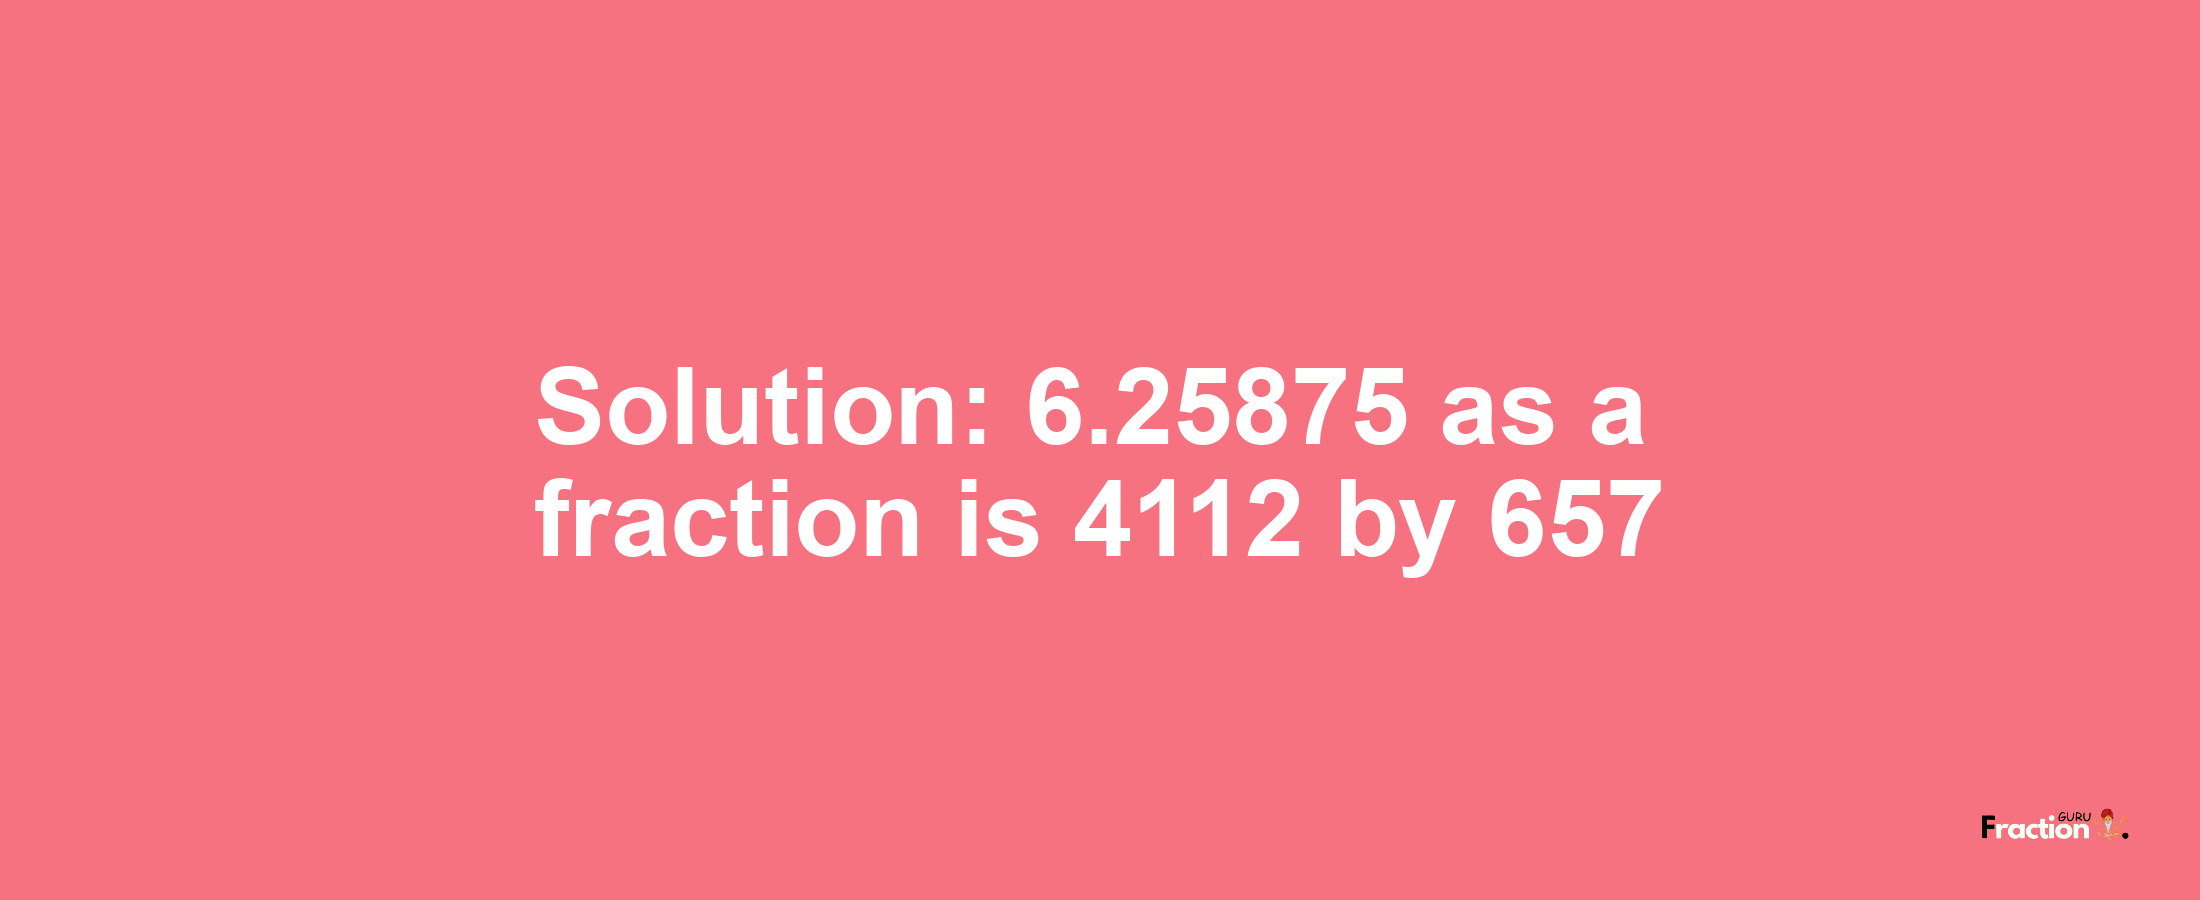 Solution:6.25875 as a fraction is 4112/657